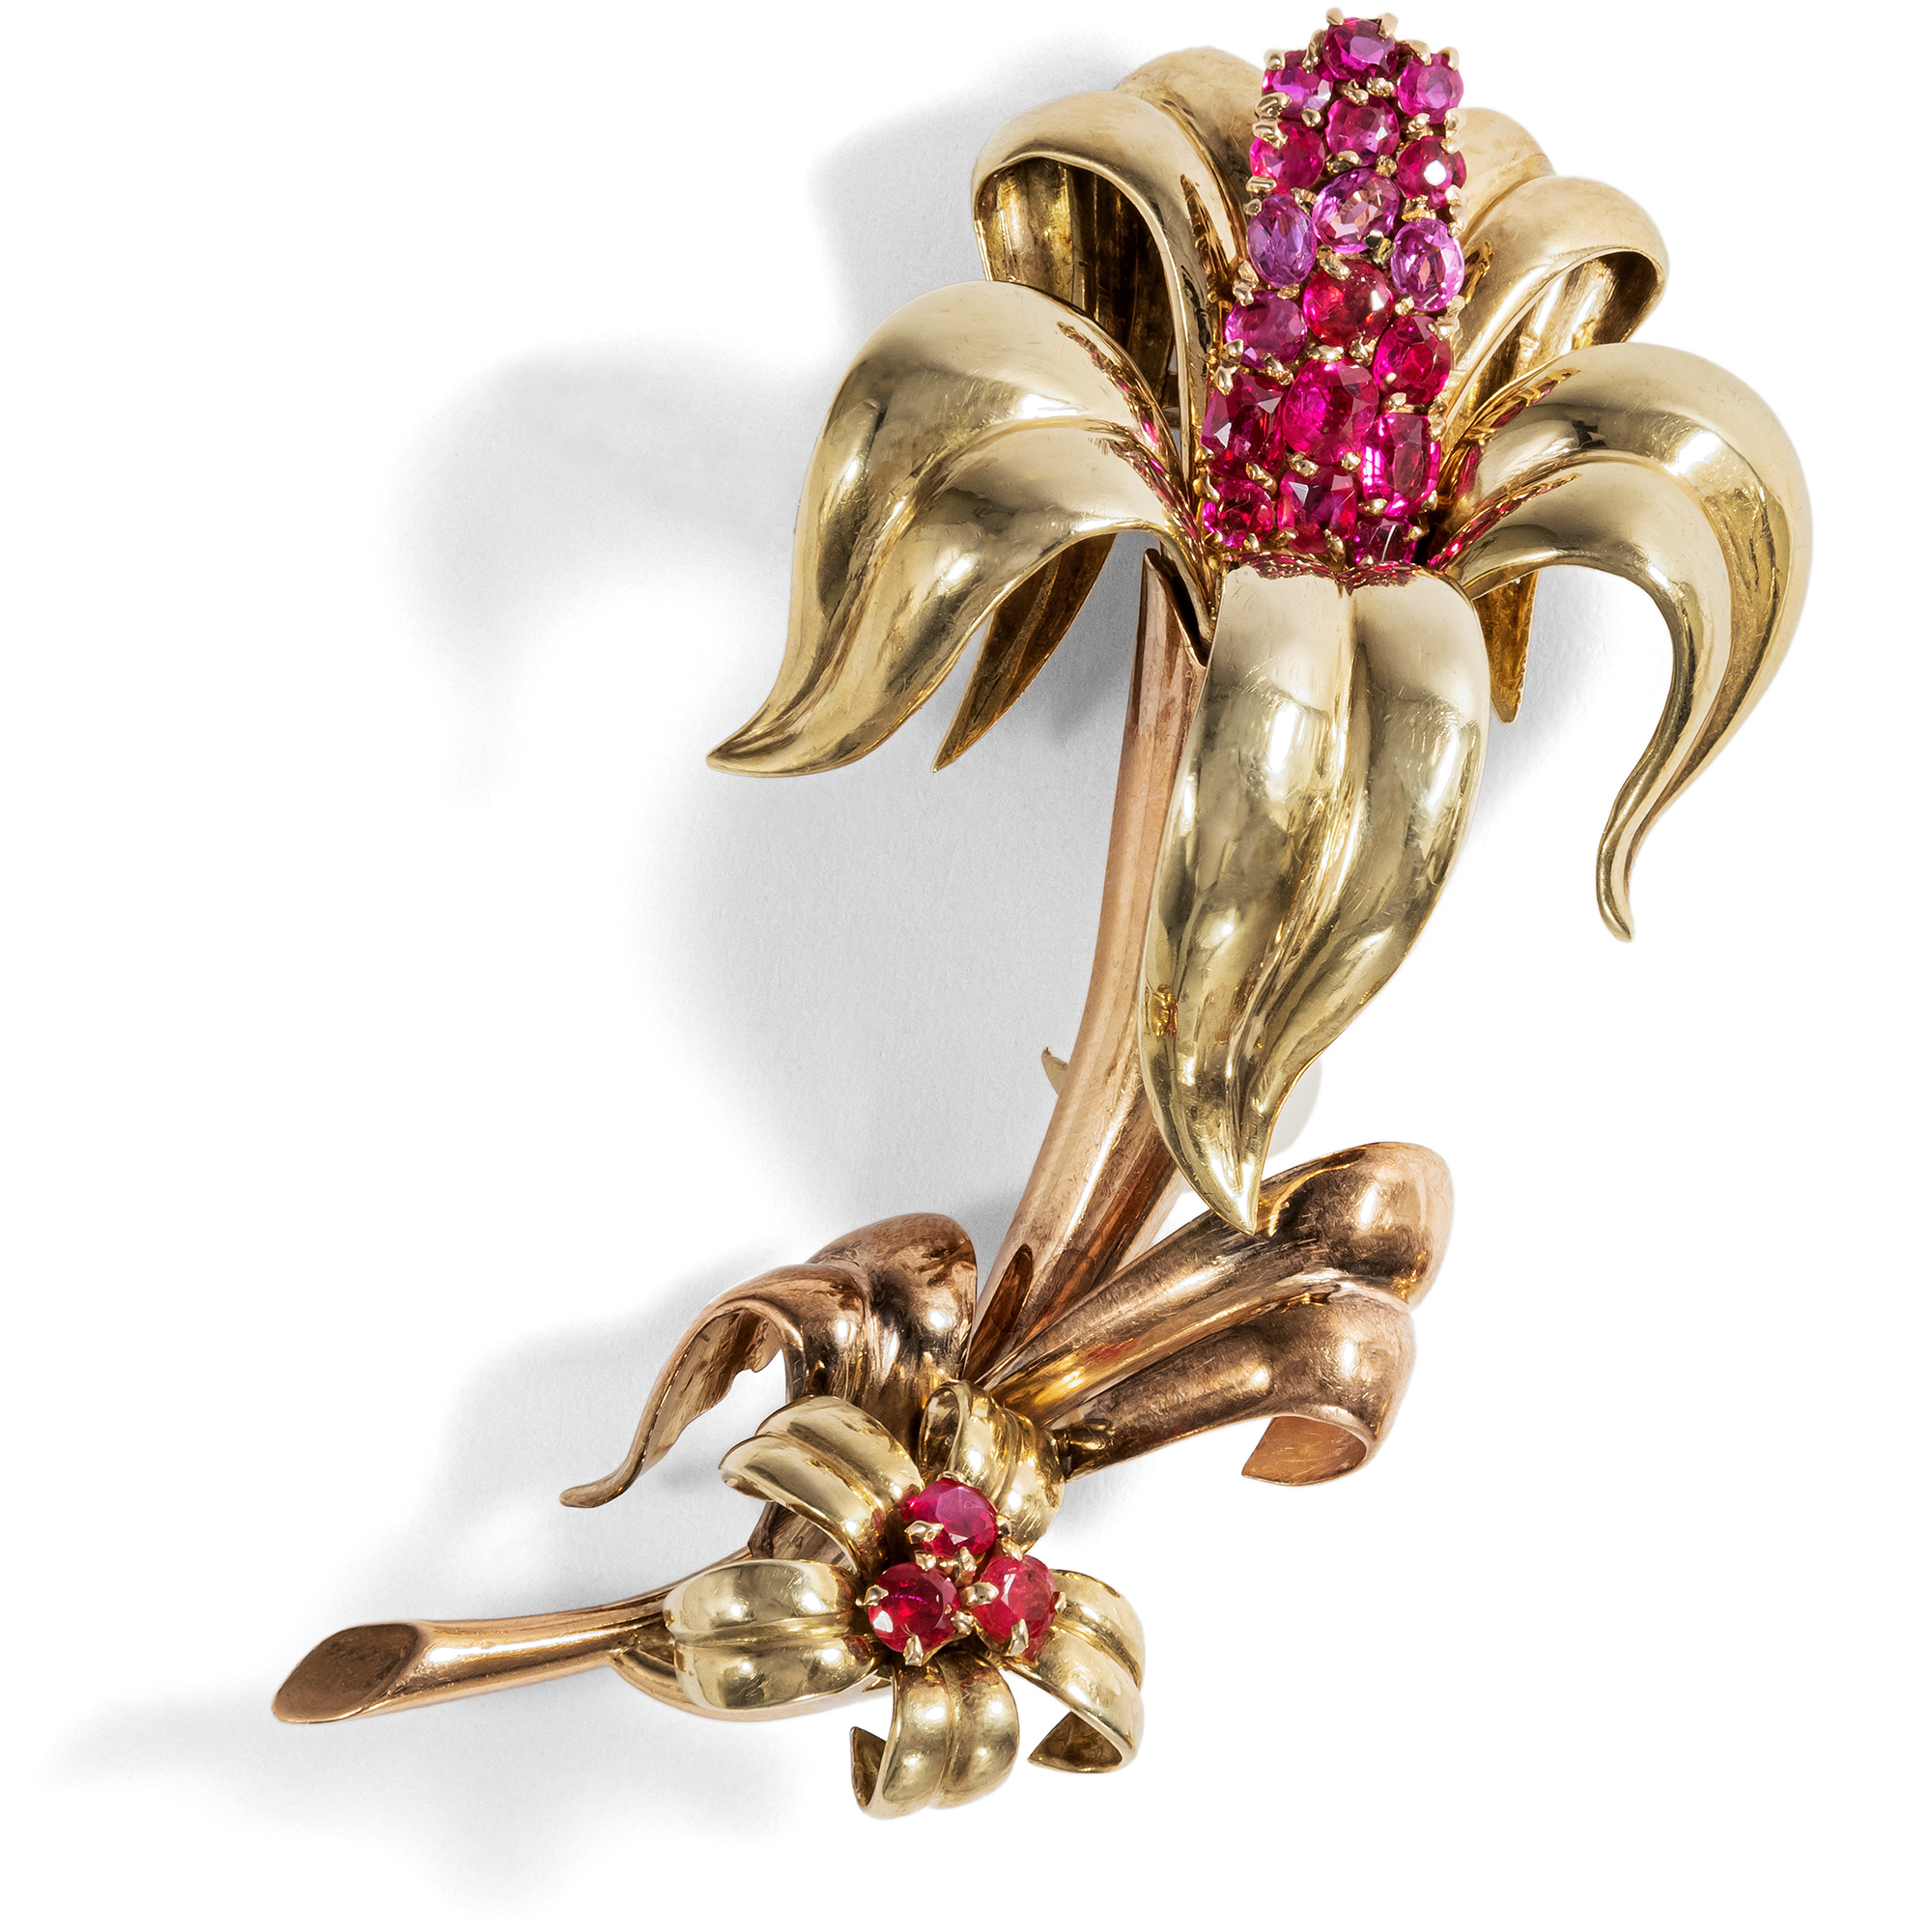 Magnificent Late Art Deco Brooch With Burma Rubies In Gold, Great Britain Circa 1940